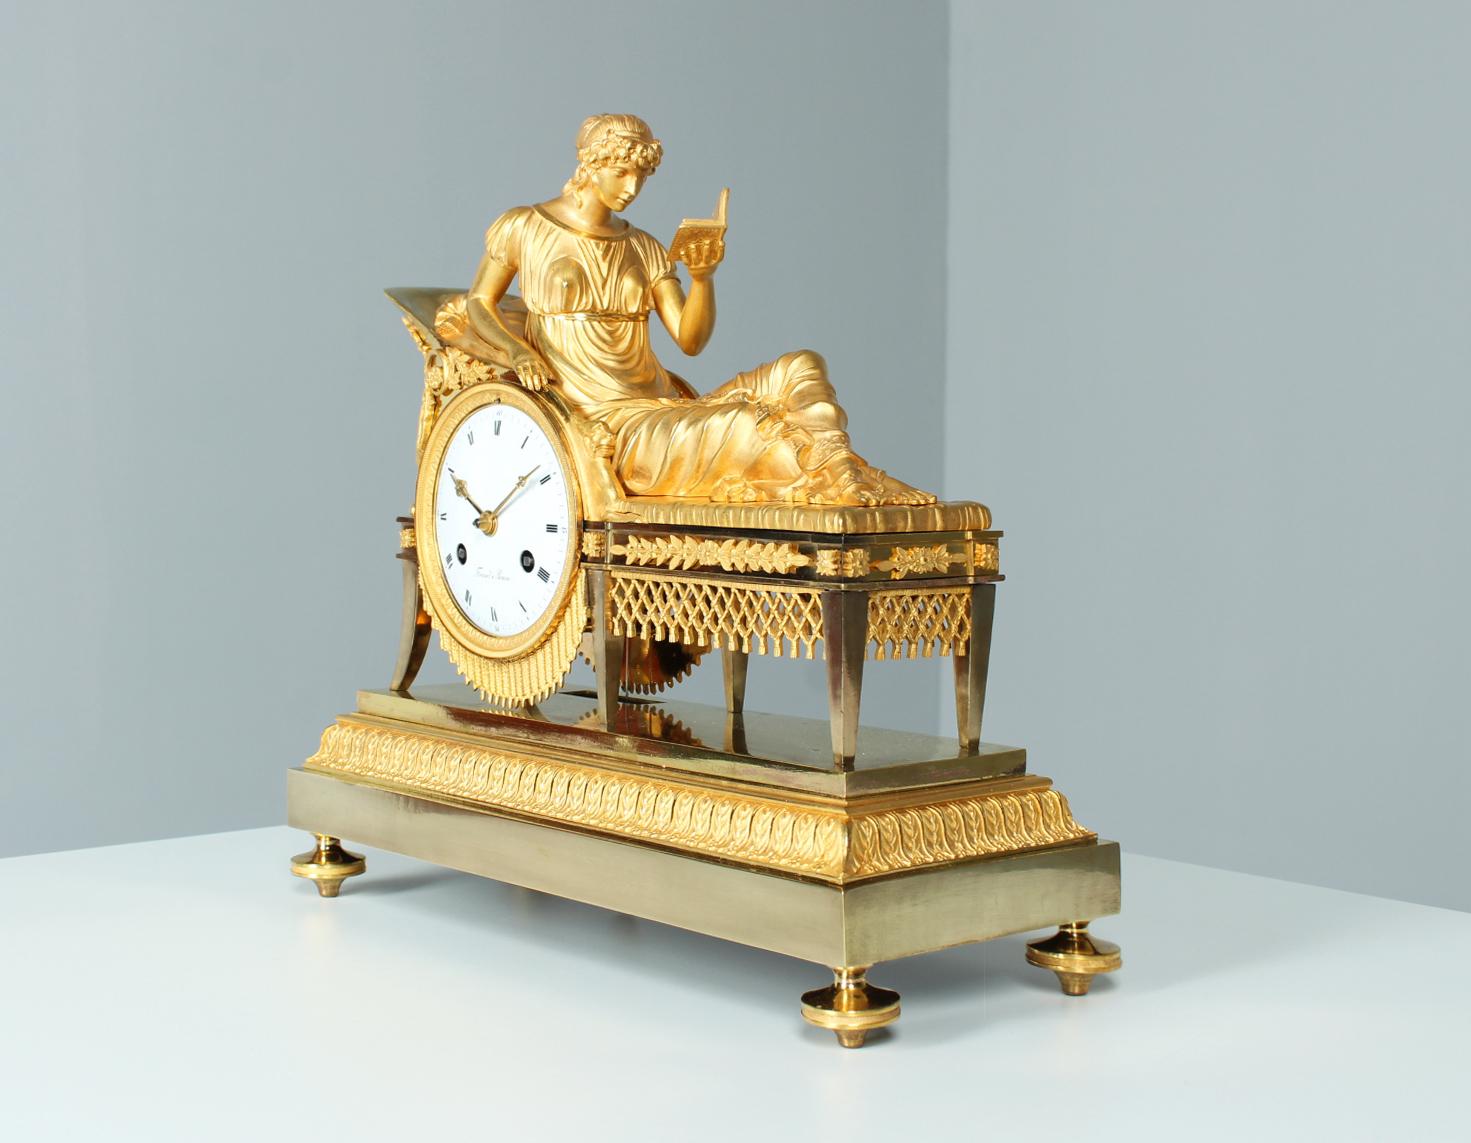 Empire Pendule - La Recamière

France
Bronze, enamel
Empire around 1810

Dimensions: H x W x D: 33 x 35 x 14 cm

Description:
Fancy and rare fire-gilt mantel clock from the Empire period circa 1810.

A young woman is depicted reading on a